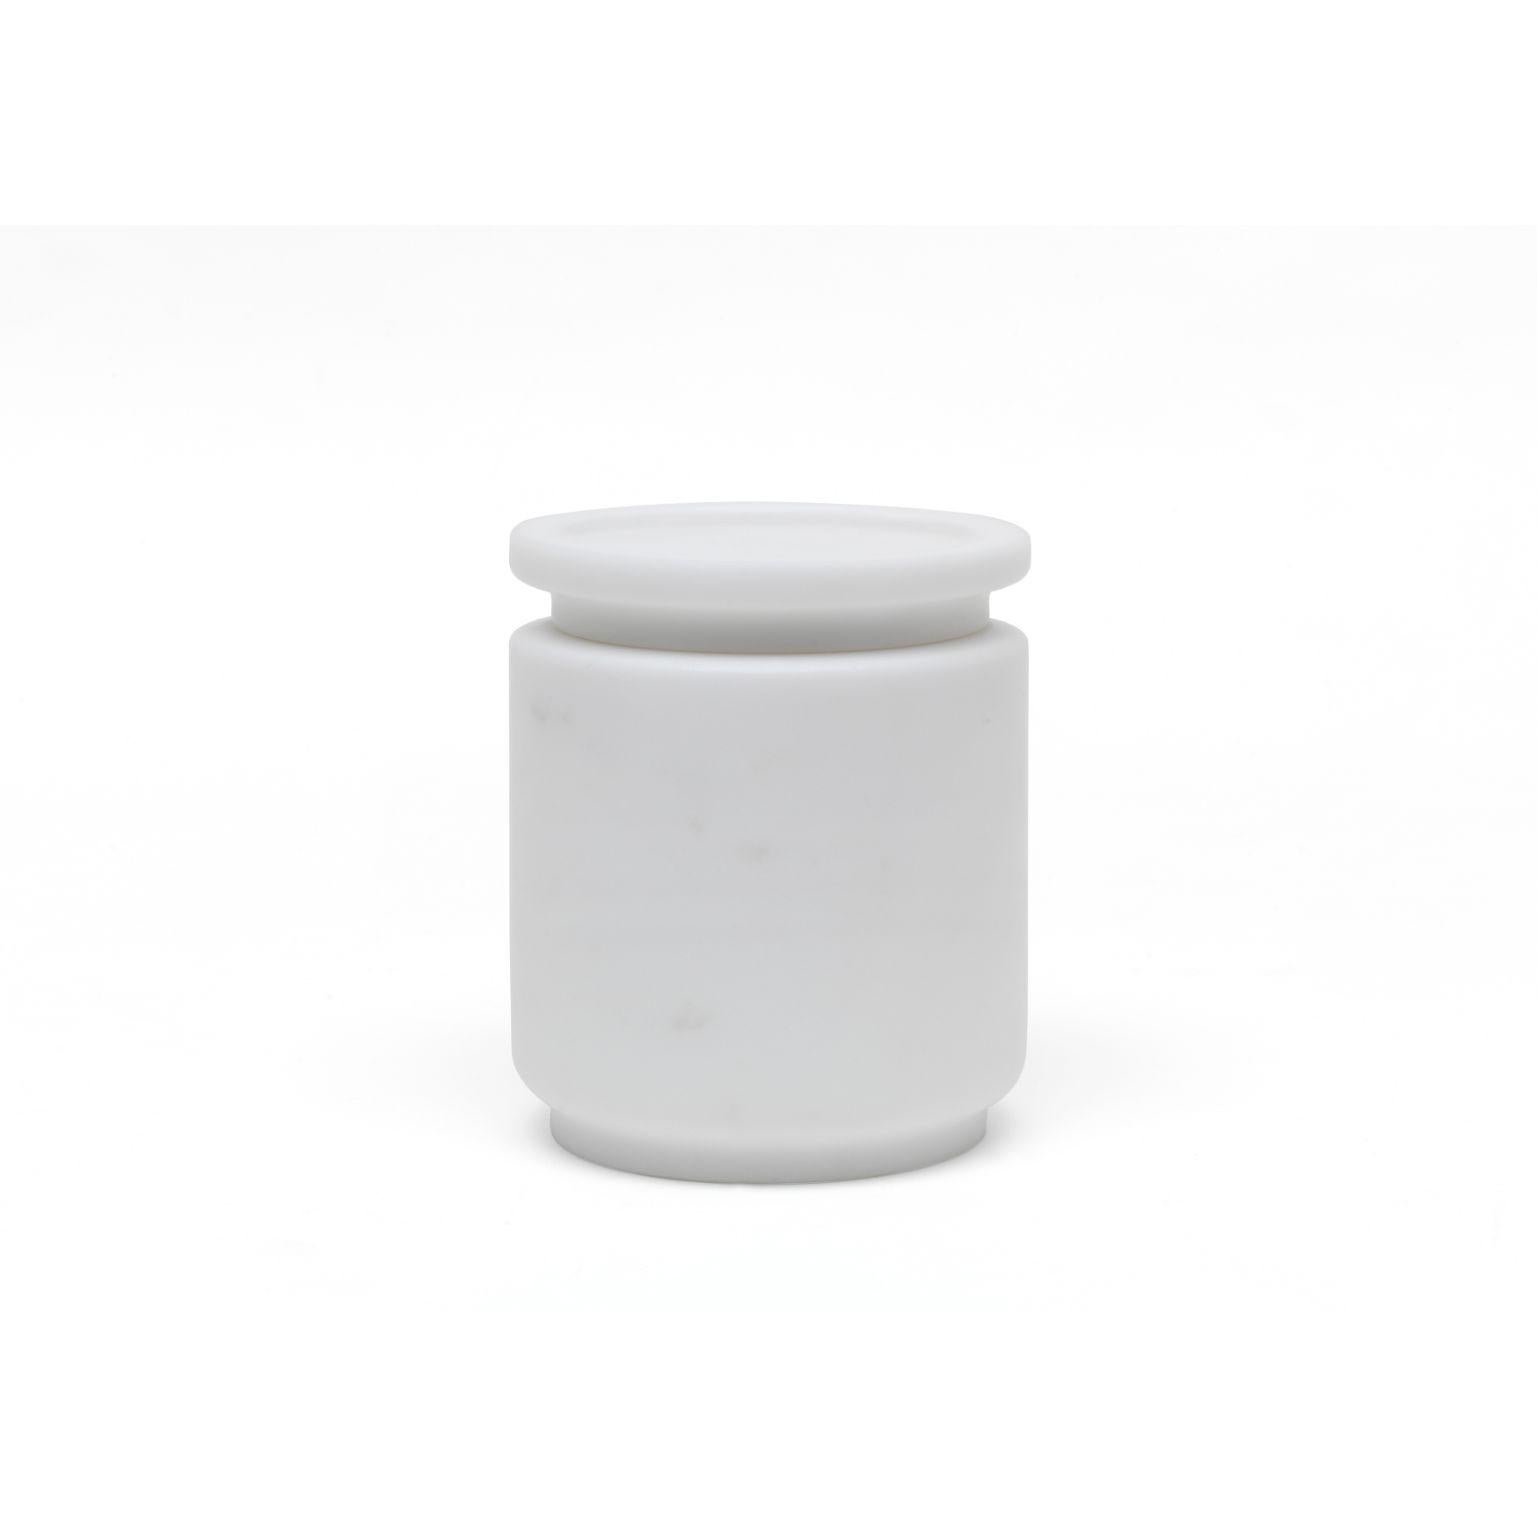 A set of 3 Pyxis pots - White by Ivan Colominas
Pyxis Collection
Dimensions: 12.6 x 11, 12.6 x 14.5, 12.6 x 19 cm
Materials: Bianco Michelangelo

Also available: Nero Marquinia

A refined collection articulated through cylinders that vary